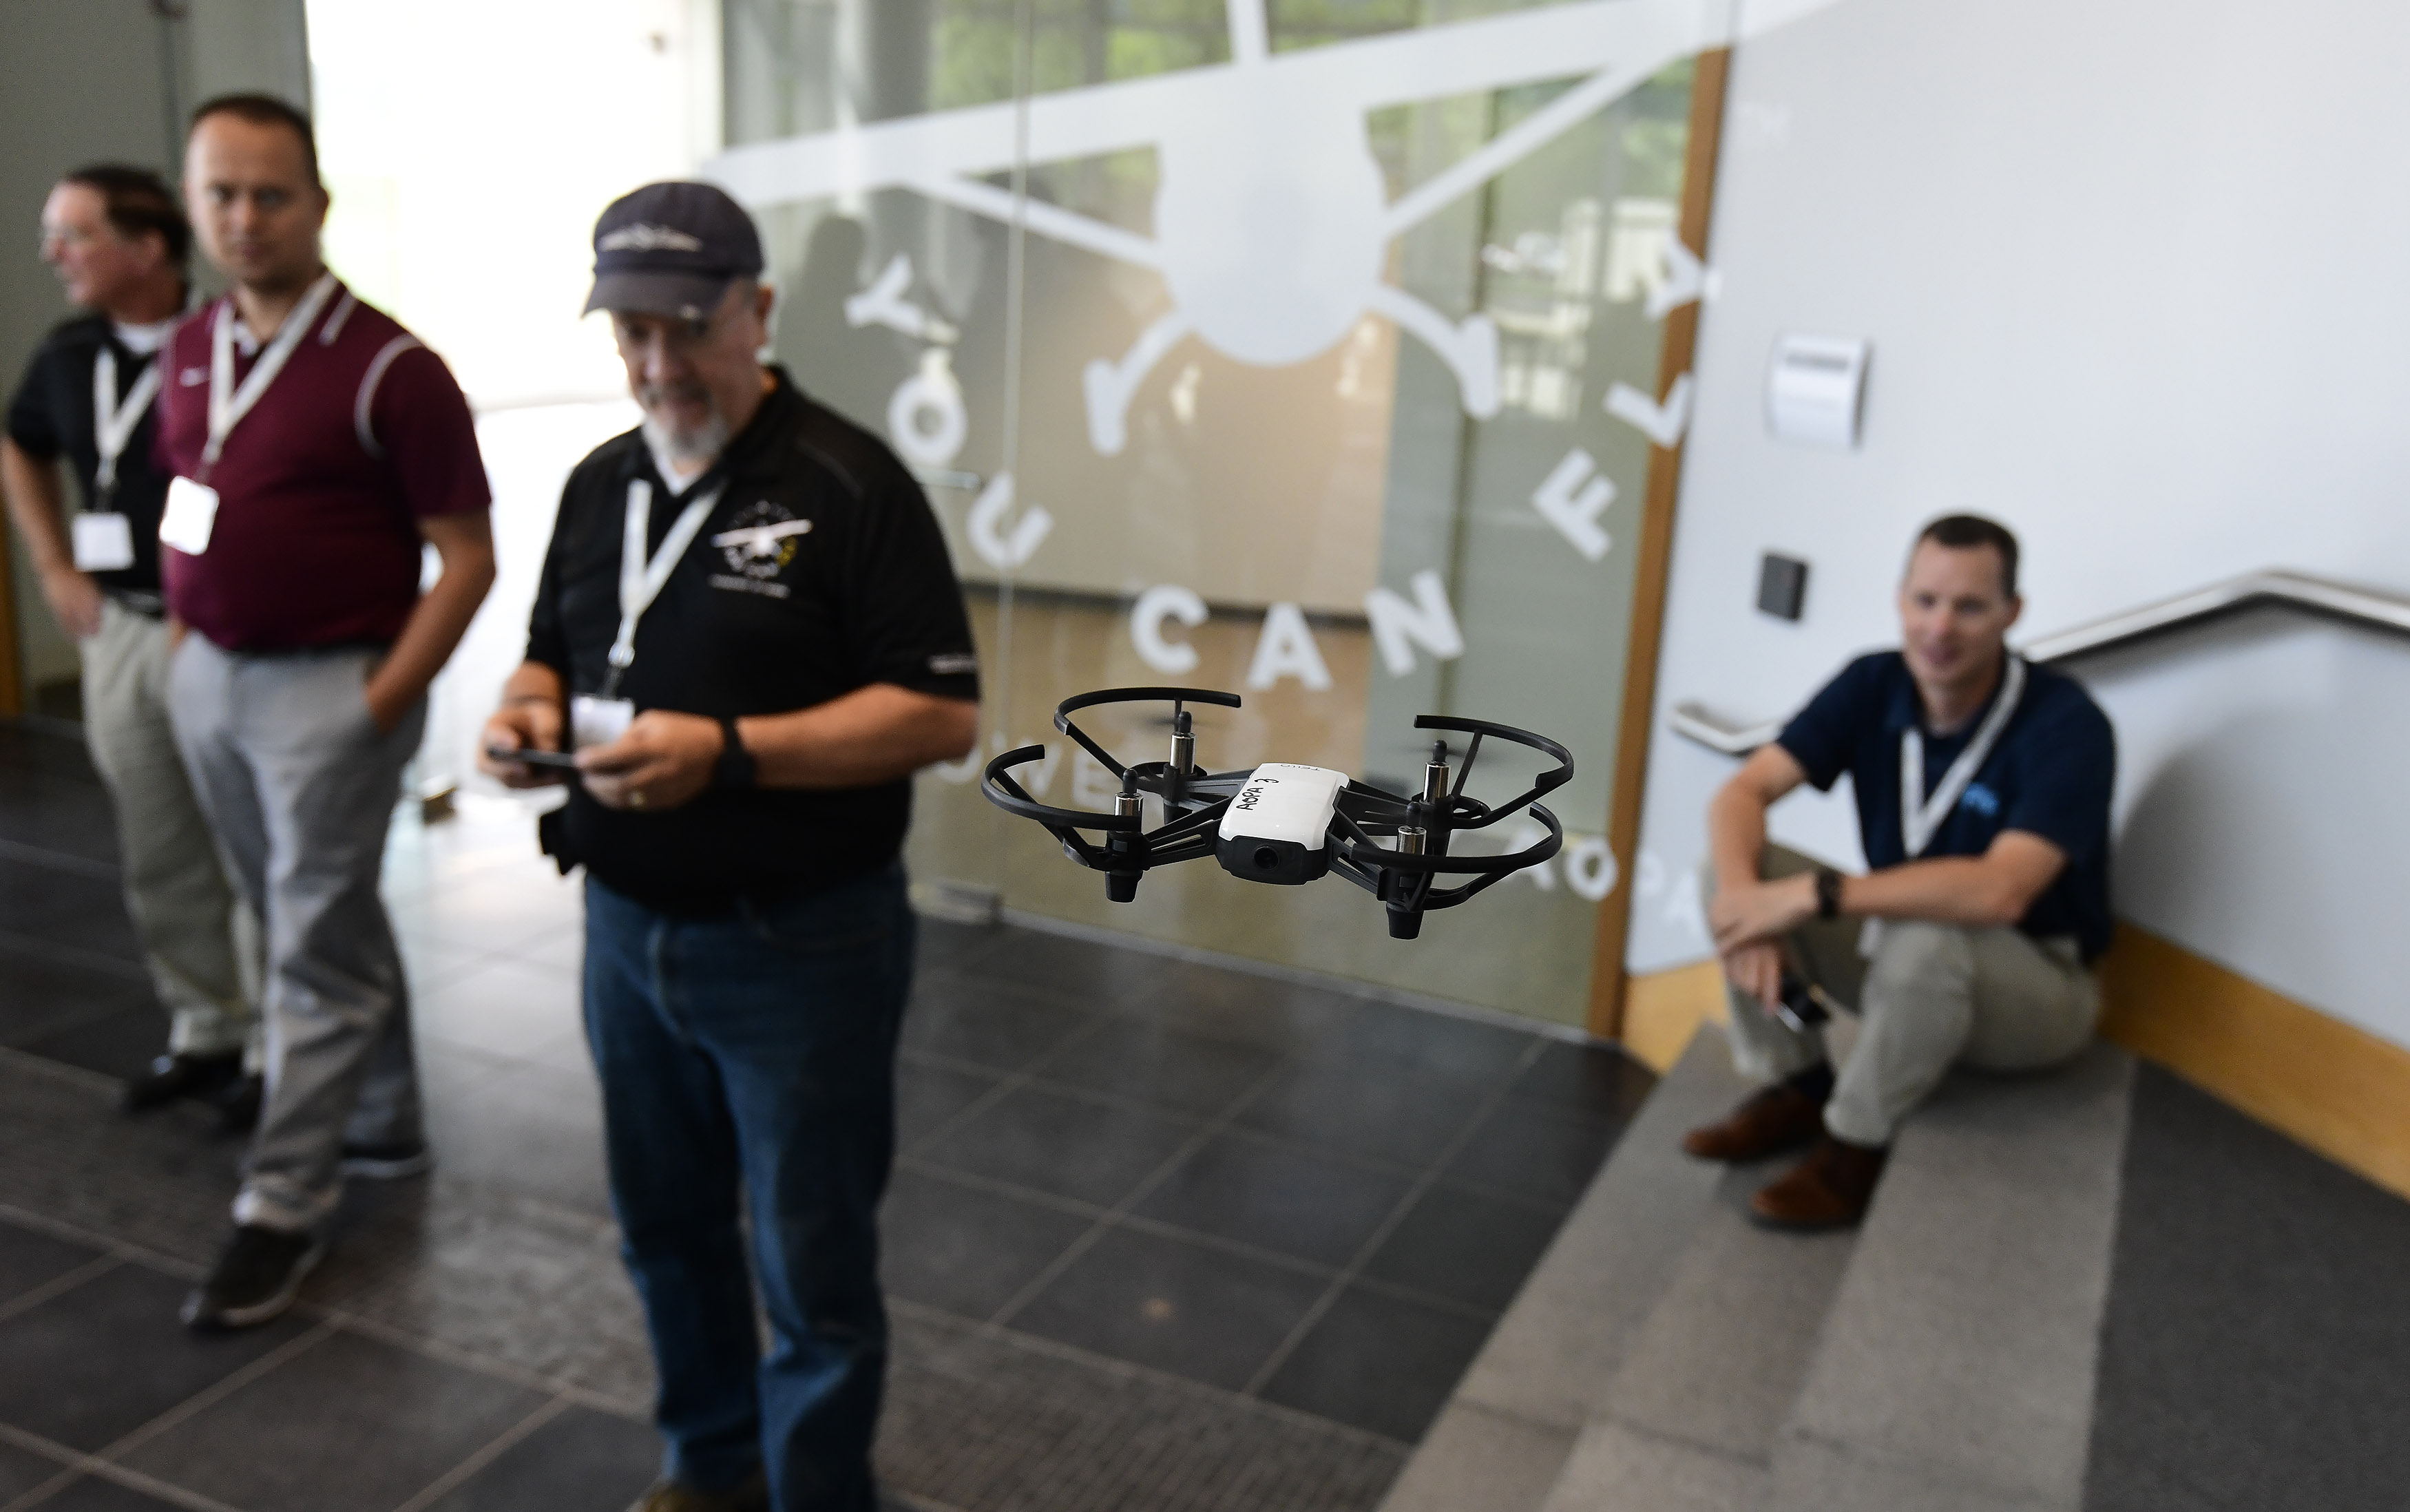 High school teachers use hands-on time piloting drones to experience the AOPA You Can Fly tenth-grade aviation curriculum that teaches science, technology, engineering, and math in a fun and engaging manner. Photo by David Tulis.